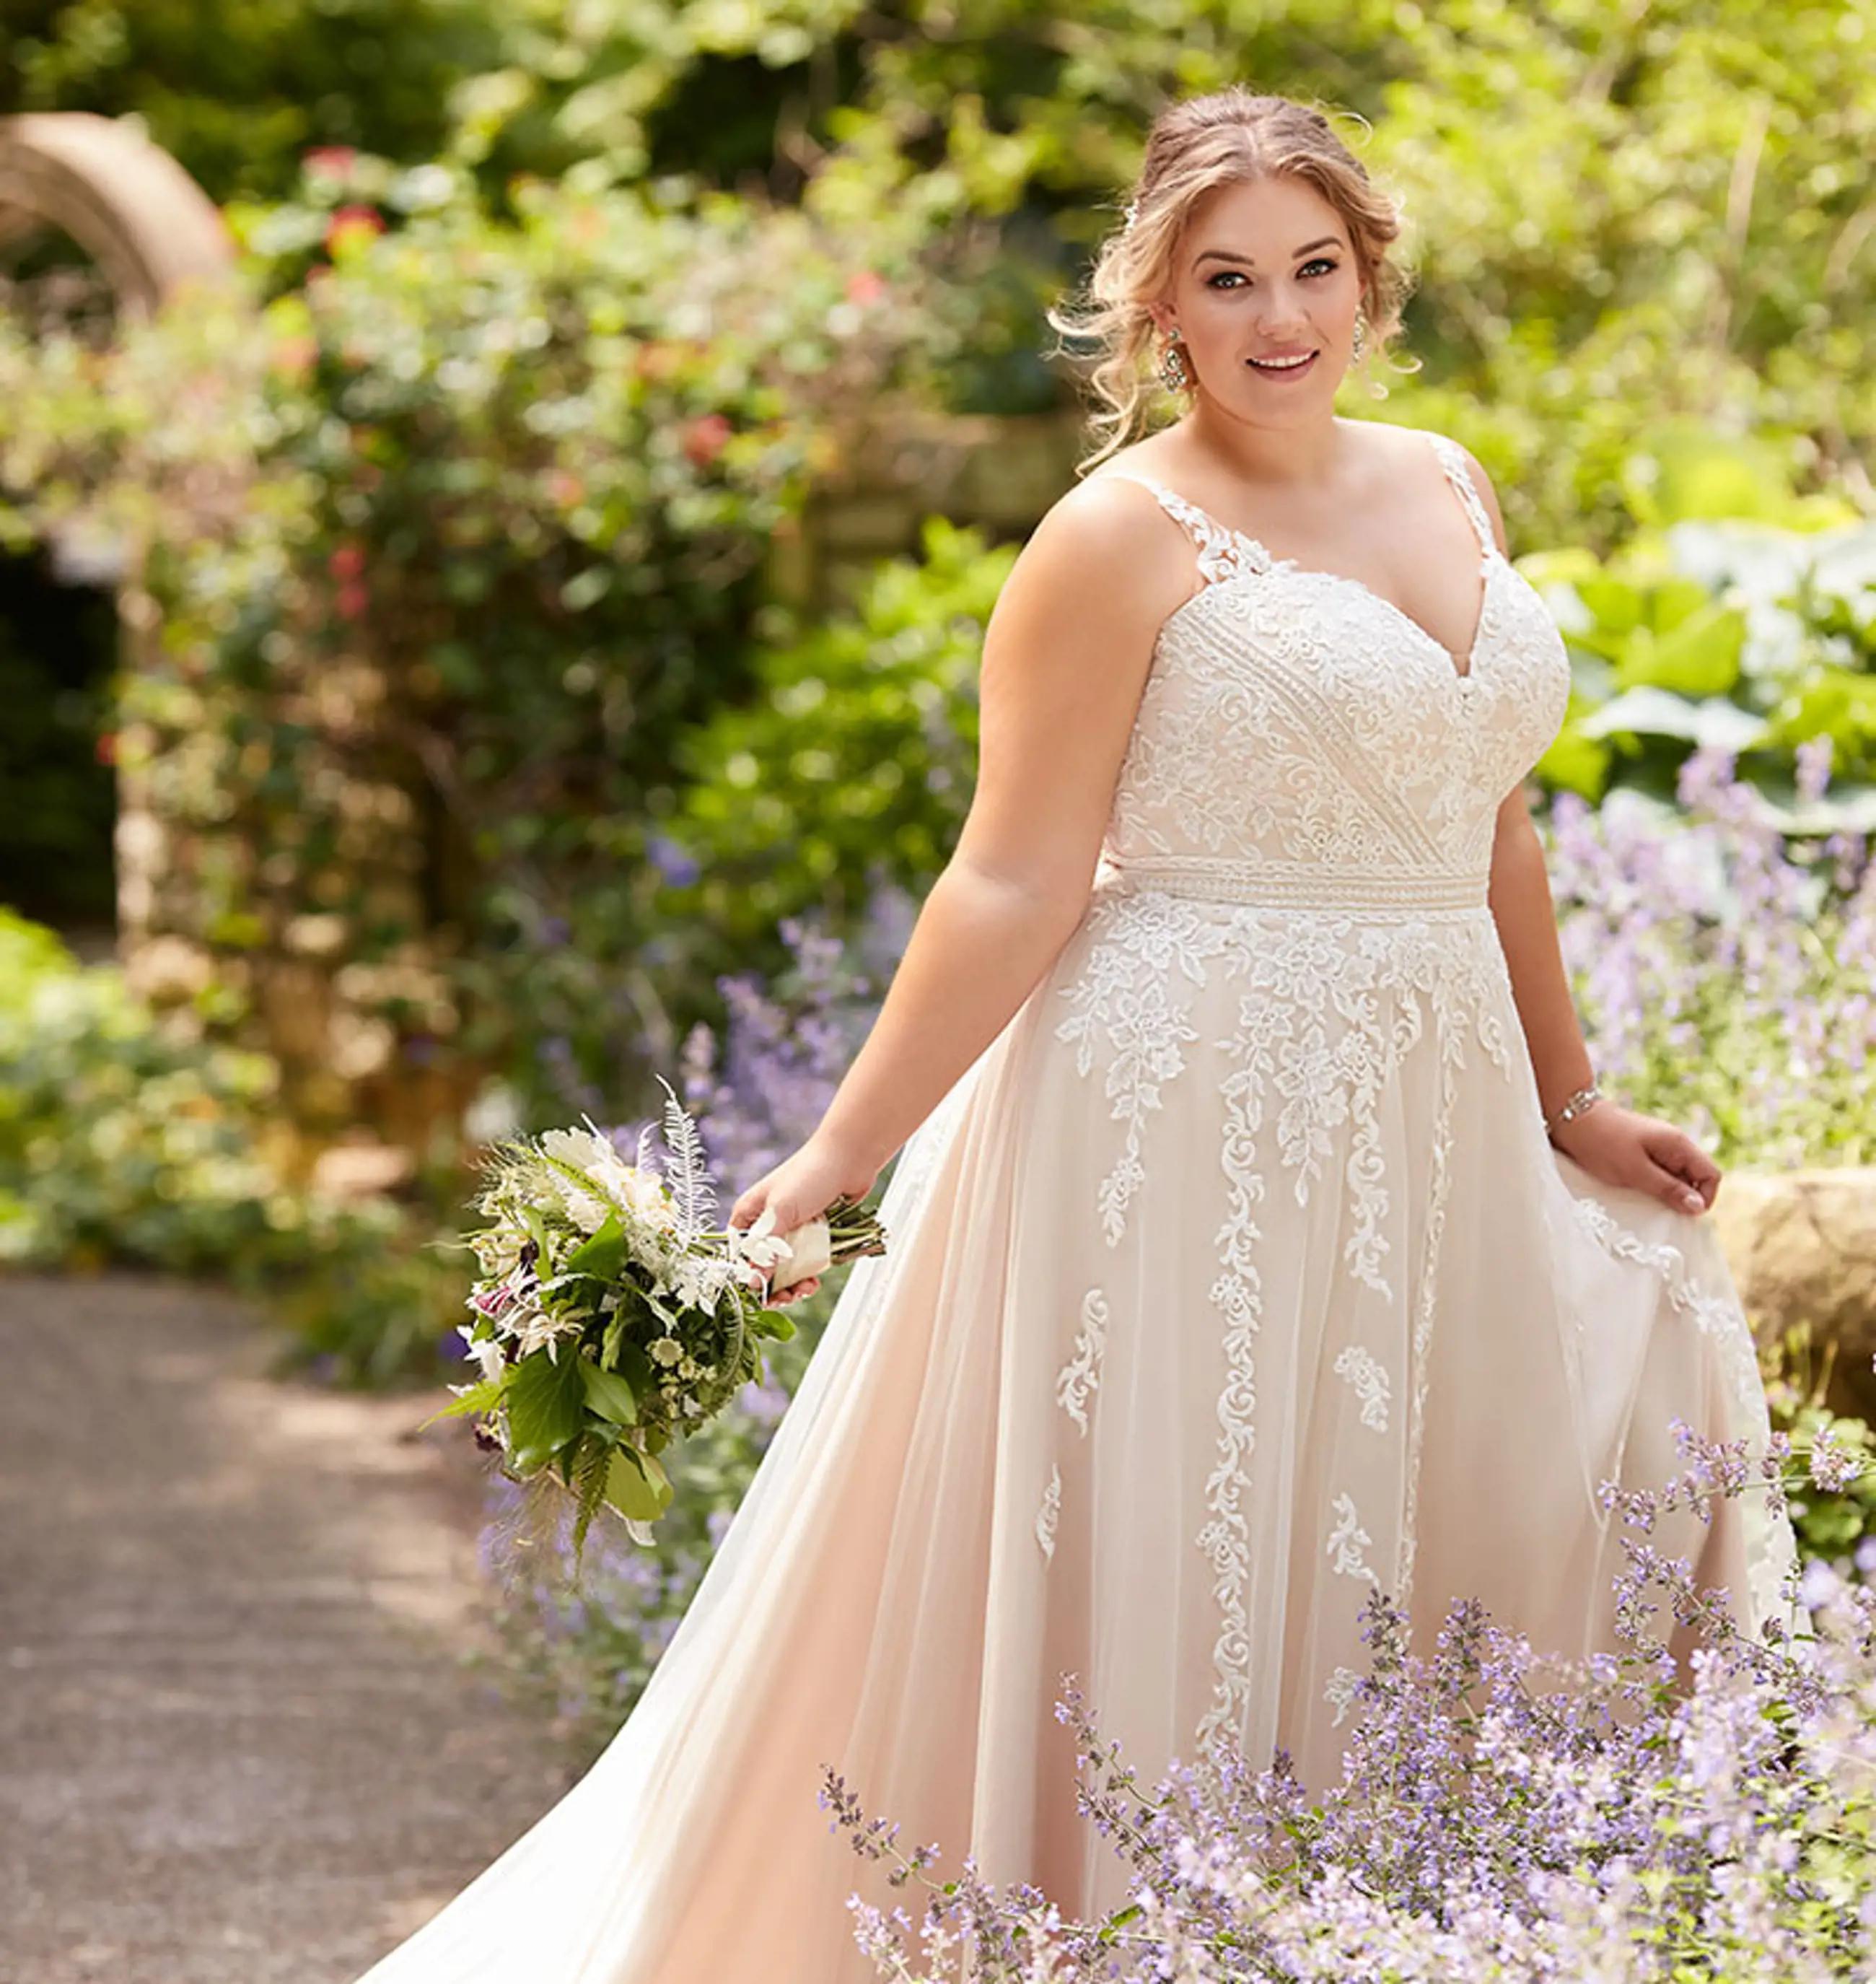 Colorful Wedding Dress Feature: For the Trendsetting Bride Image